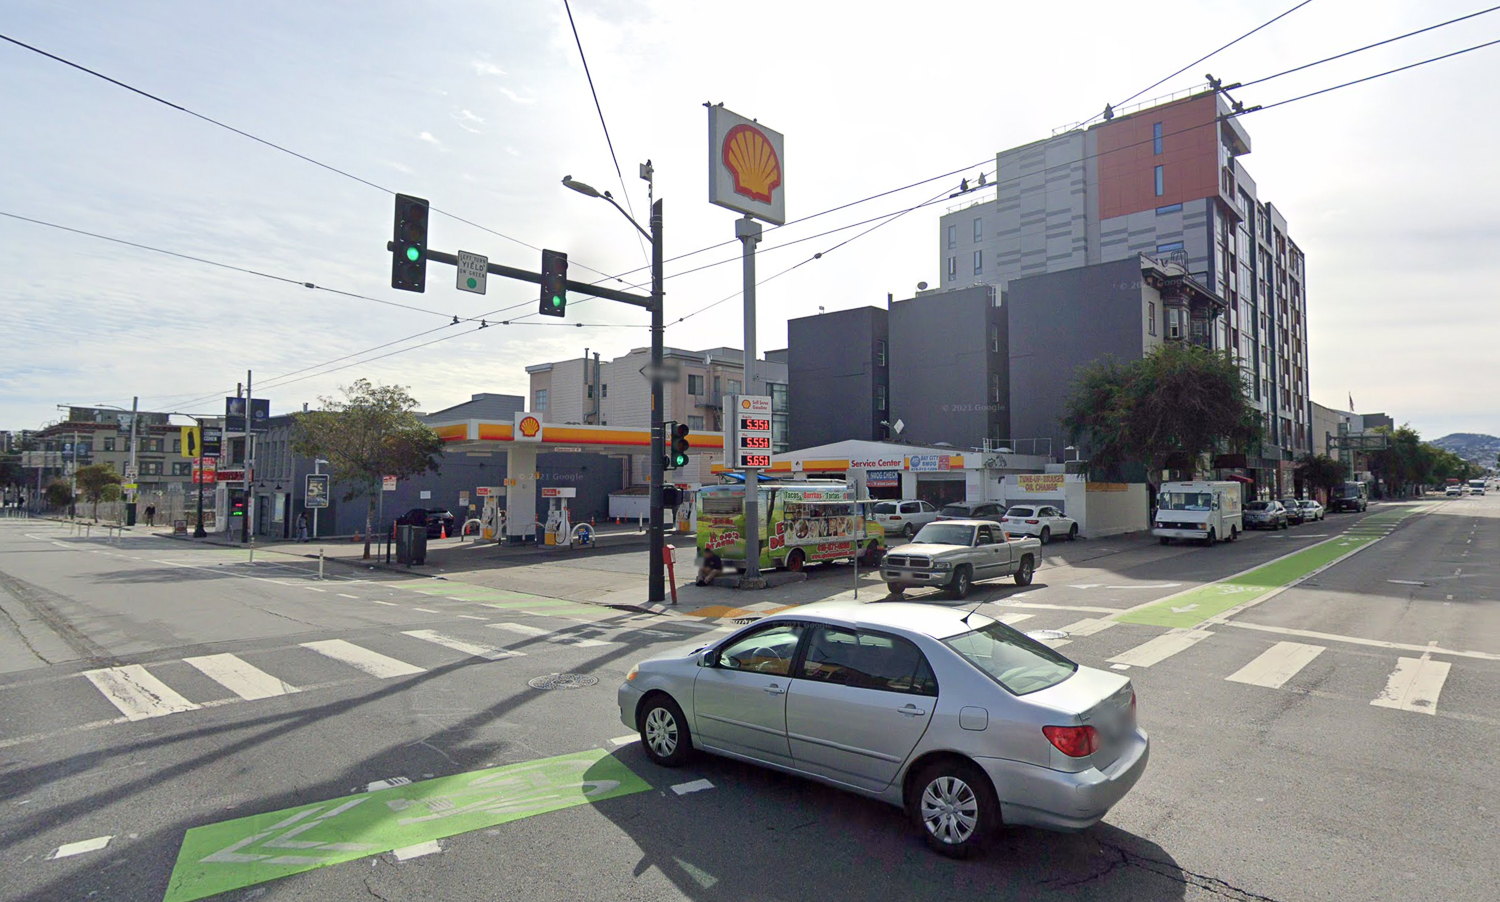 300 5th Street existing condition, image via Google Street View